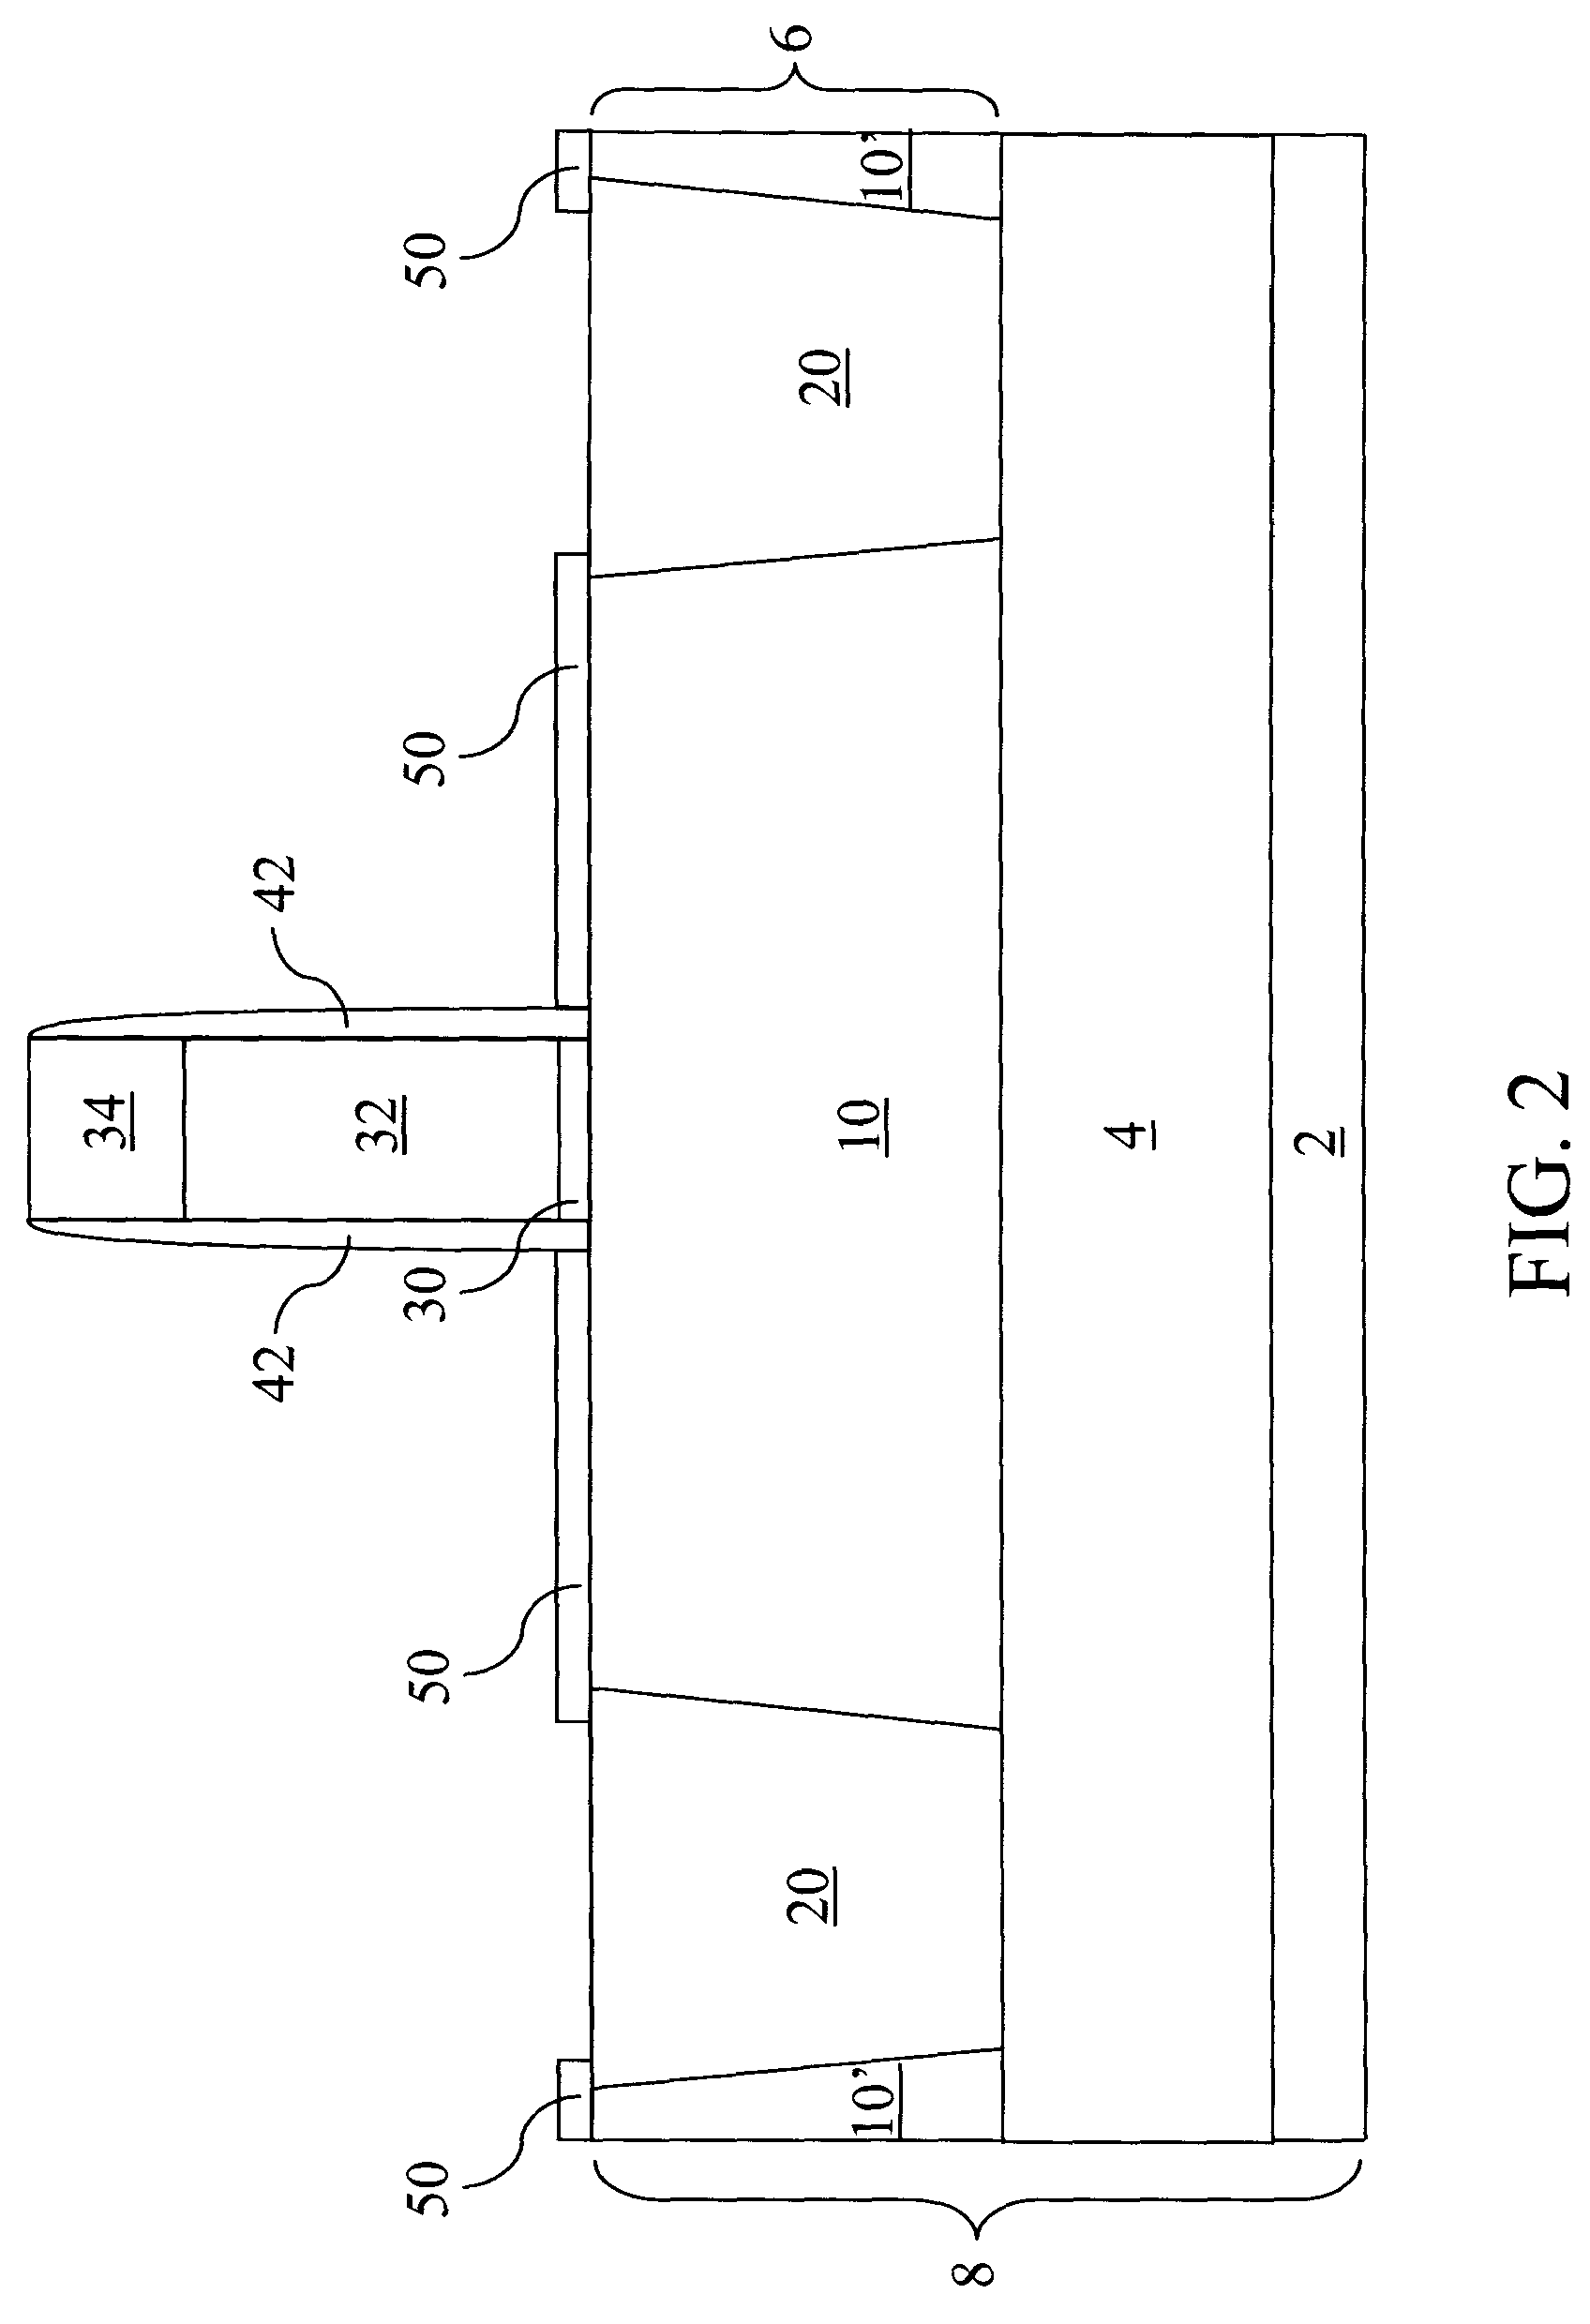 Field effect transistor containing a wide band gap semiconductor material in a drain